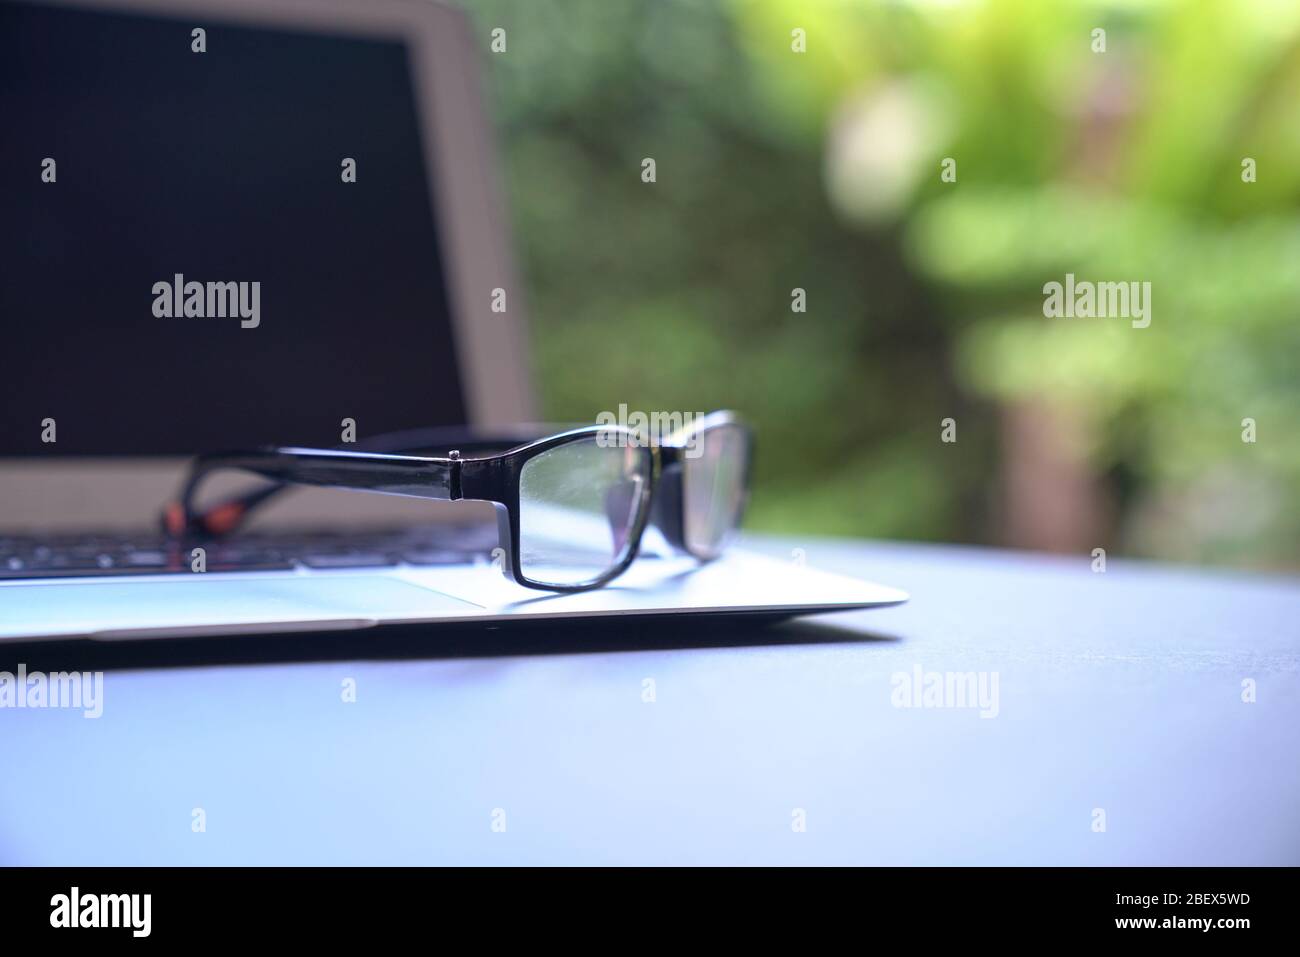 Reading glasses on top of computer laptop. Green nature background. Copy space. Stock Photo